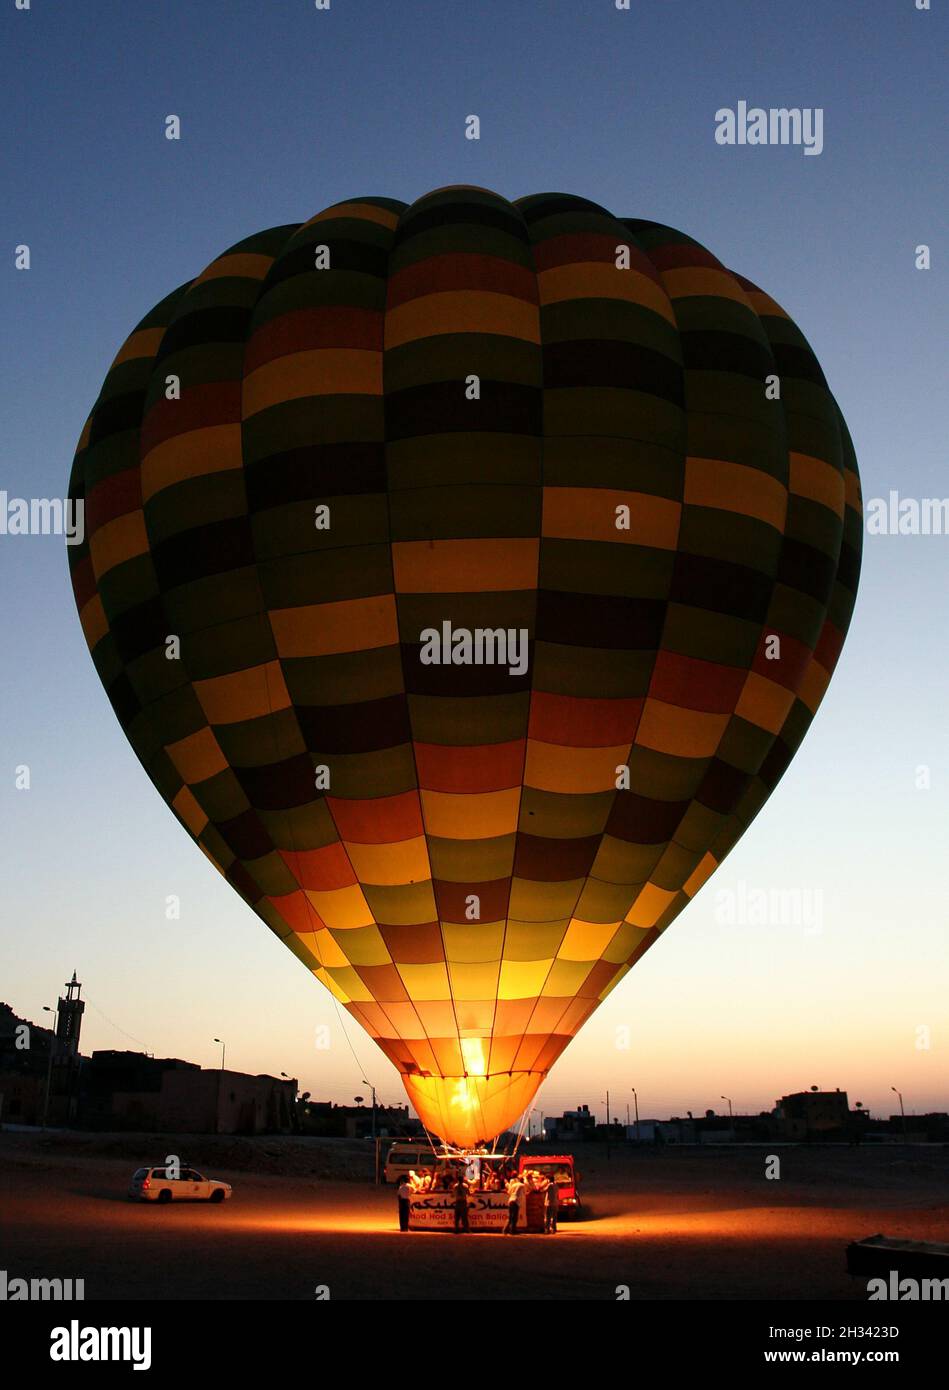 LUXOR, EGYPT - Aug 04, 2005: A "Hod Hod Soliman" Hot air Balloon preparing  for take-off at dawn in Luxor, Egypt Stock Photo - Alamy